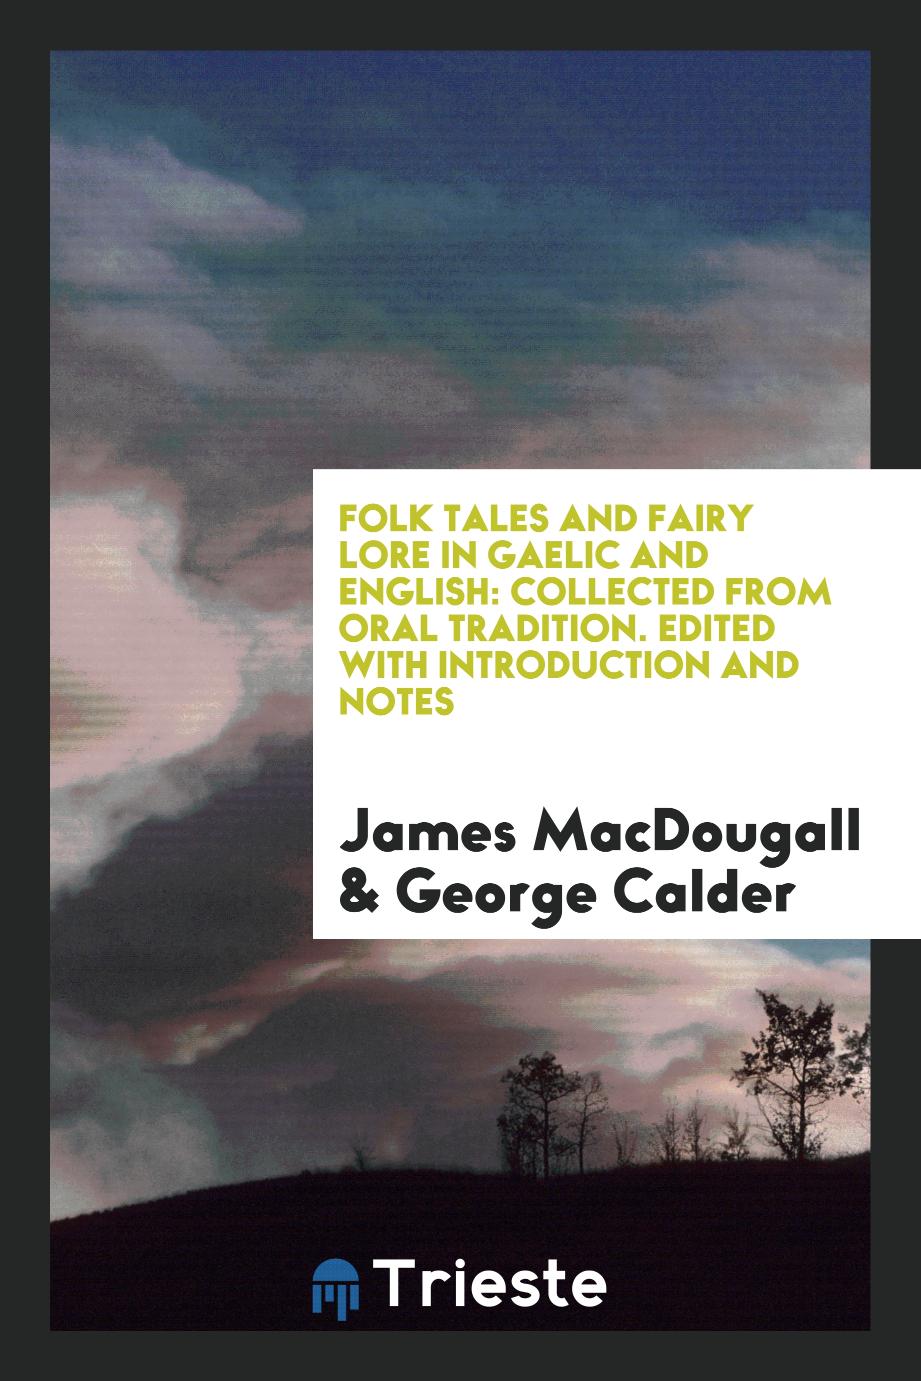 Folk Tales and Fairy Lore in Gaelic and English: Collected from Oral Tradition. Edited with Introduction and Notes